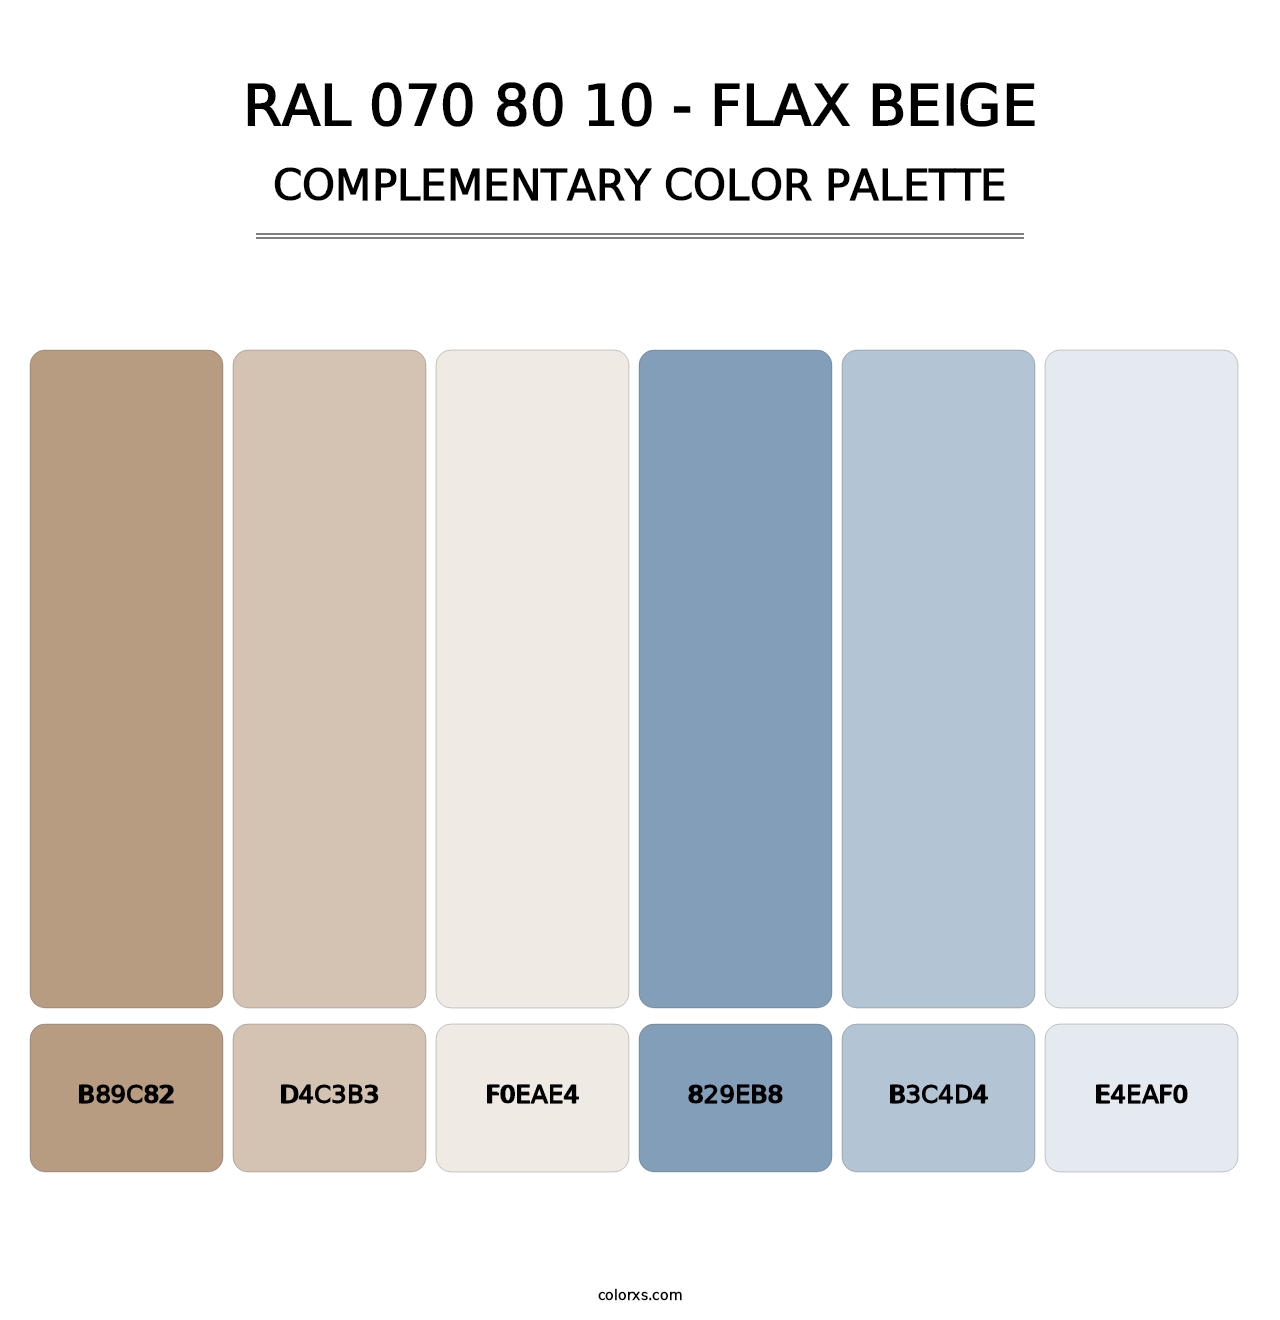 RAL 070 80 10 - Flax Beige - Complementary Color Palette